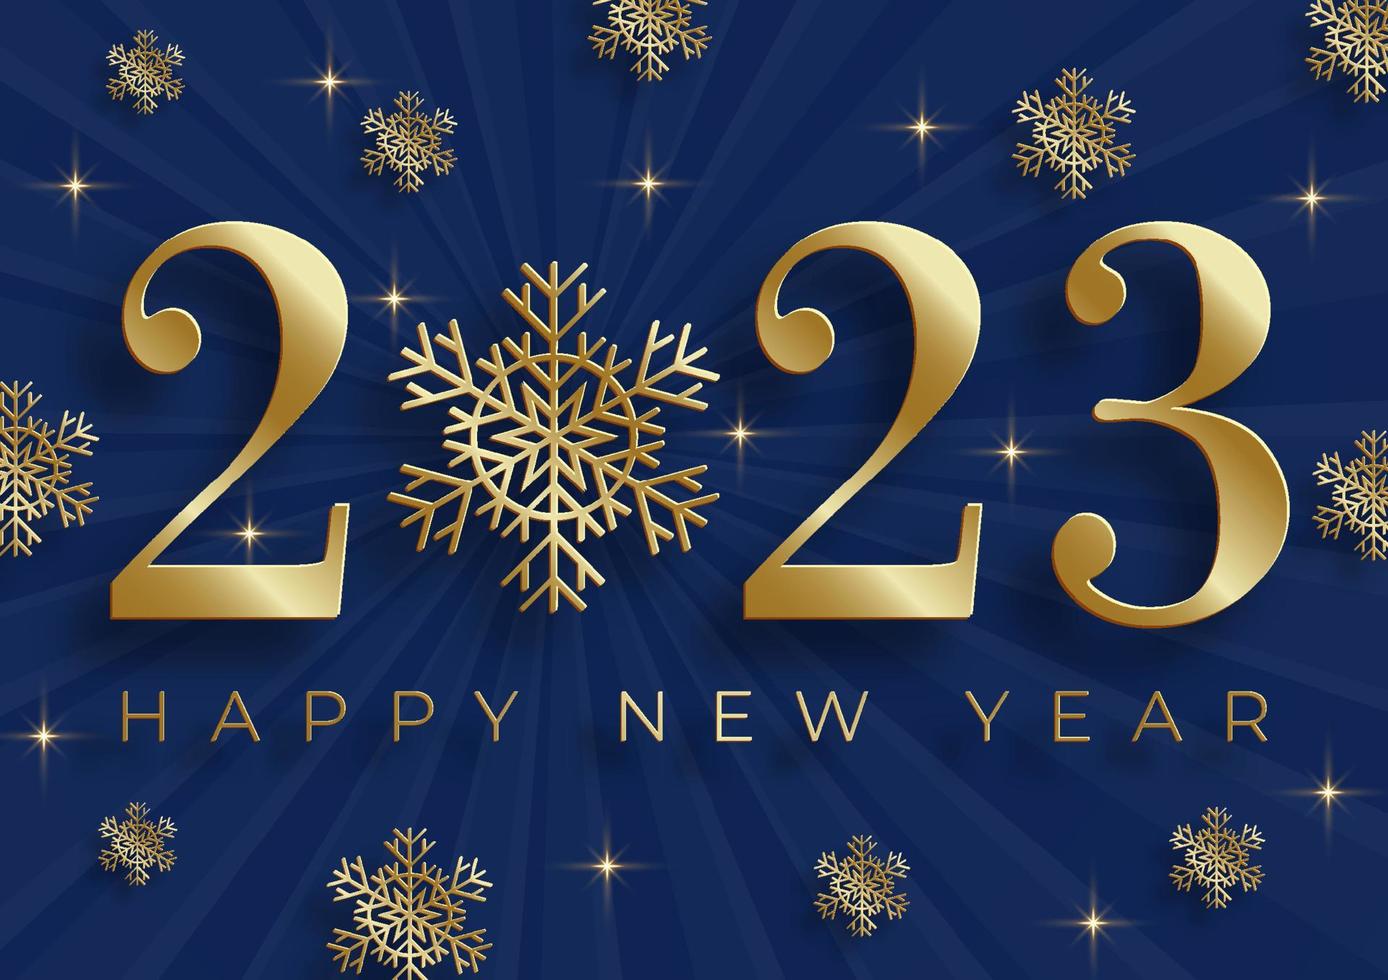 Happy New Year festive pattern on color background for invitation card, Merry Christmas, Happy new Year greeting cards